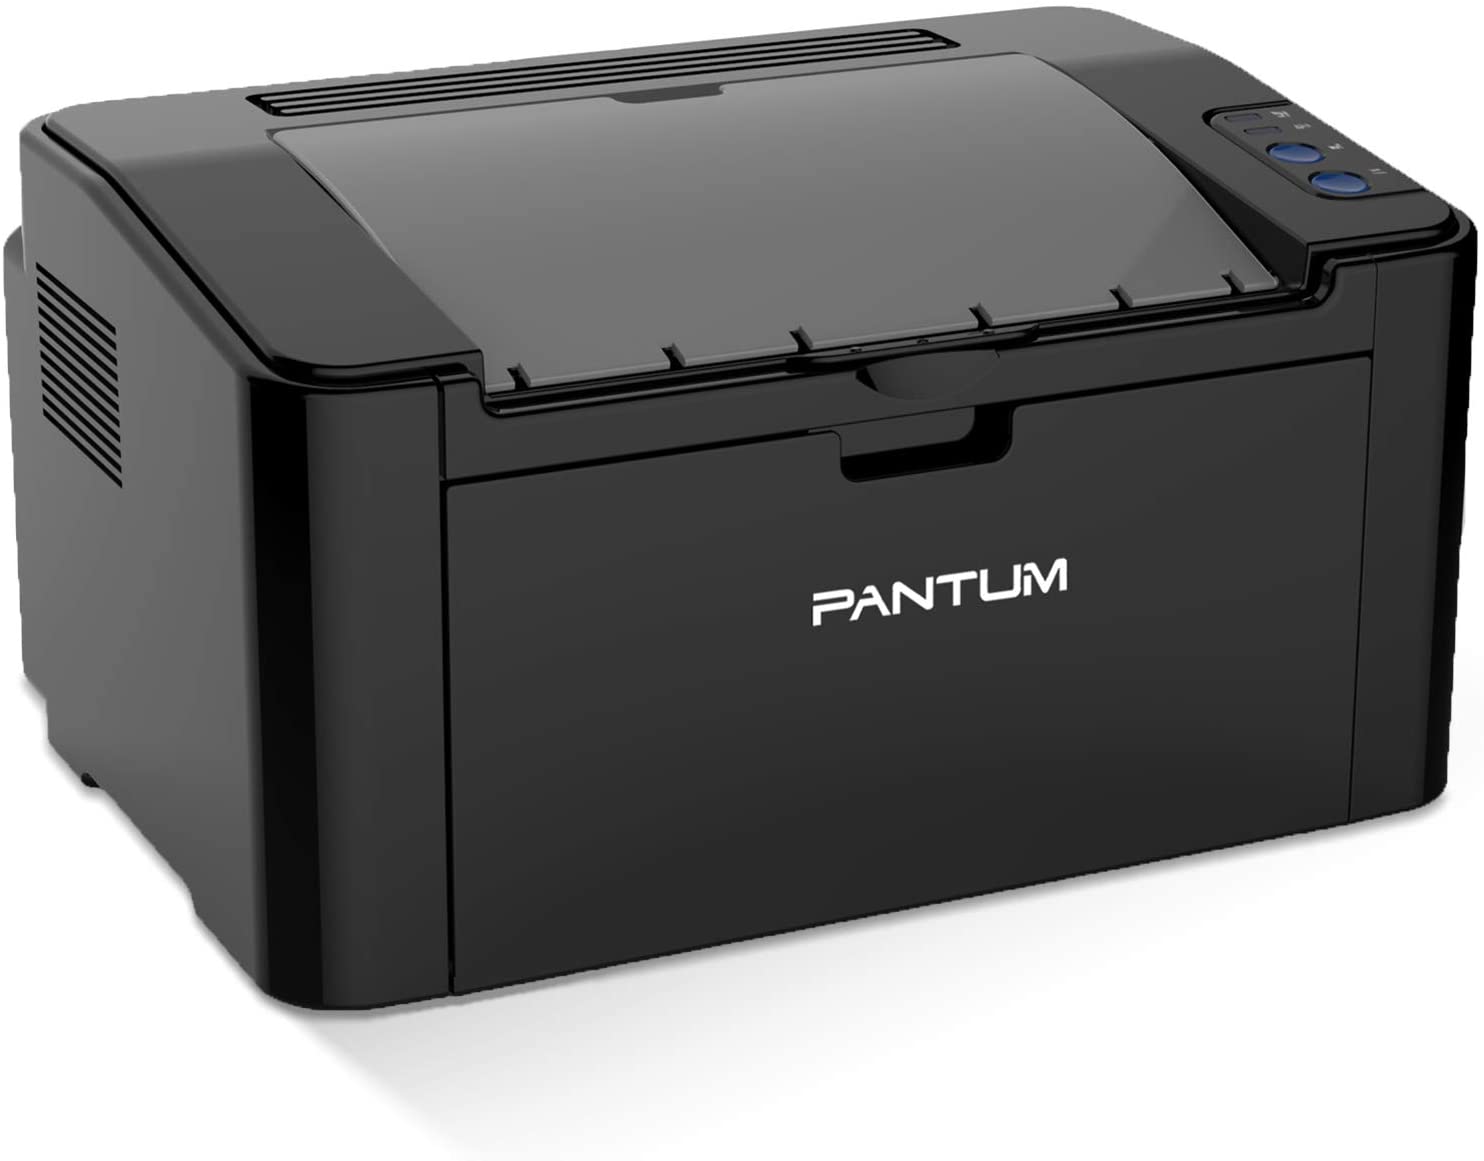 Pantum P2502W Wireless Monochrome Laser Printer Convenient for School Home and Office